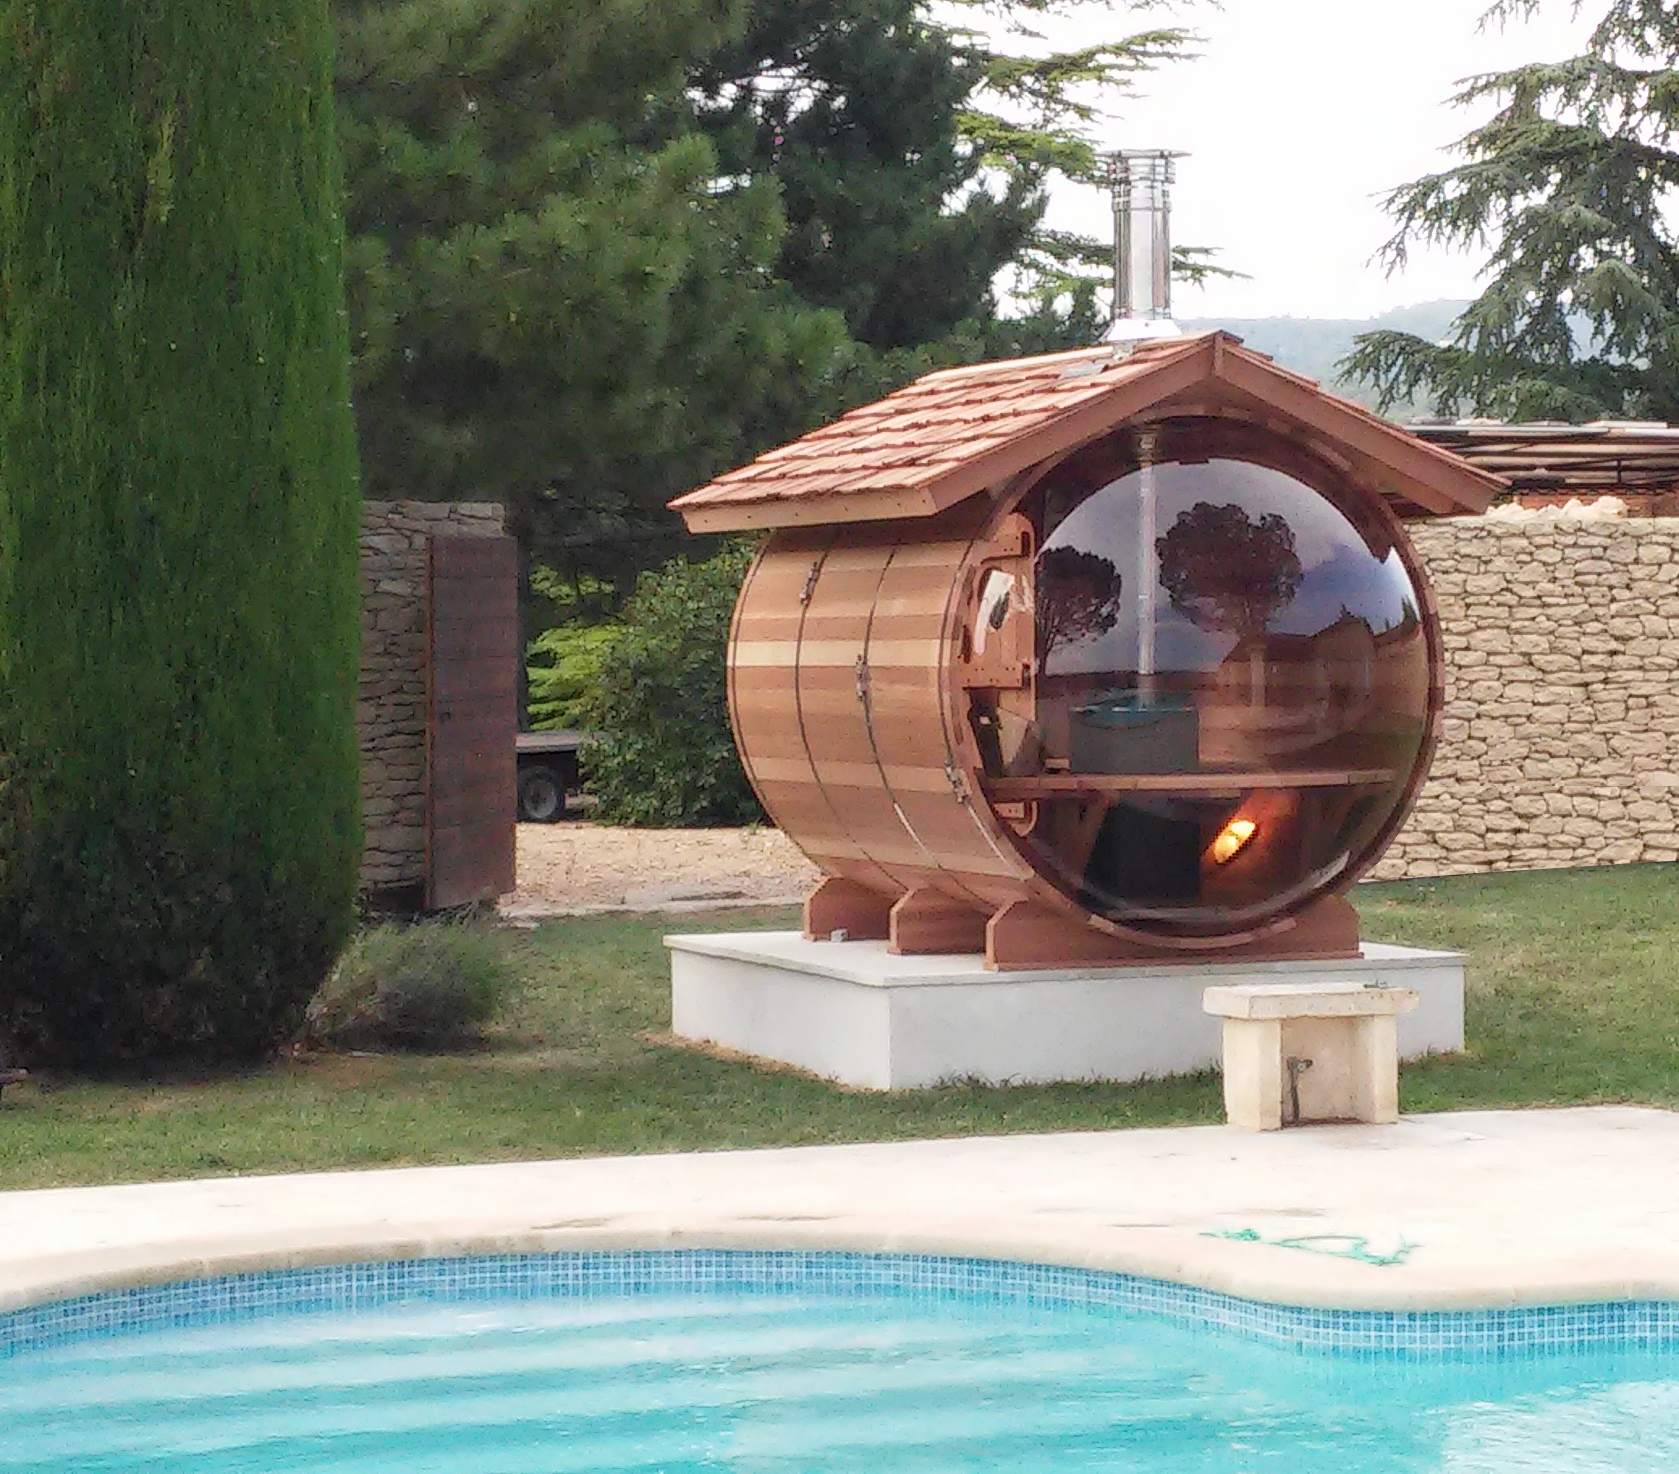 Wood-heated bubble sauna with a its roof covered with red cedar shingles